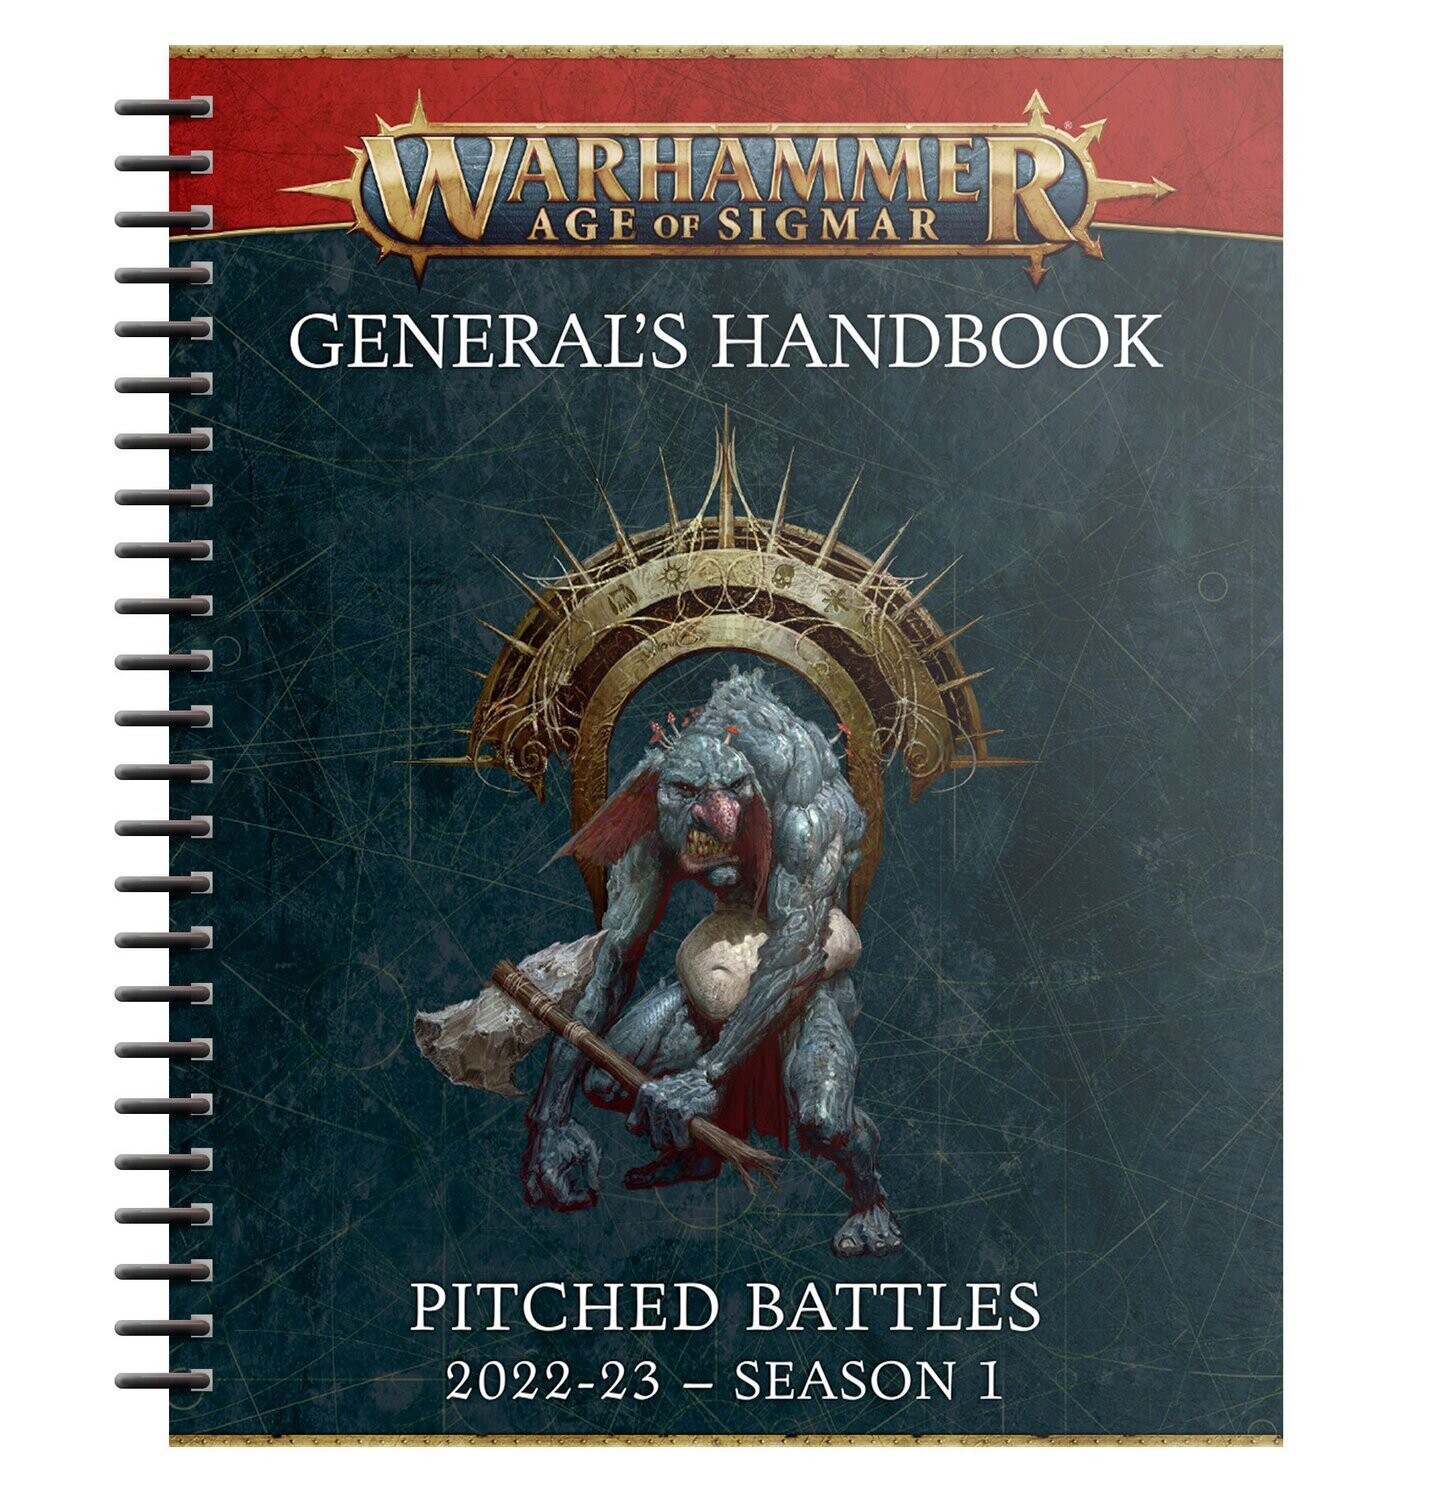 General's Handbook: Pitched Battles 2022-23 Season 1 and Pitched Battle Profiles (Englisch) - Games Workshop